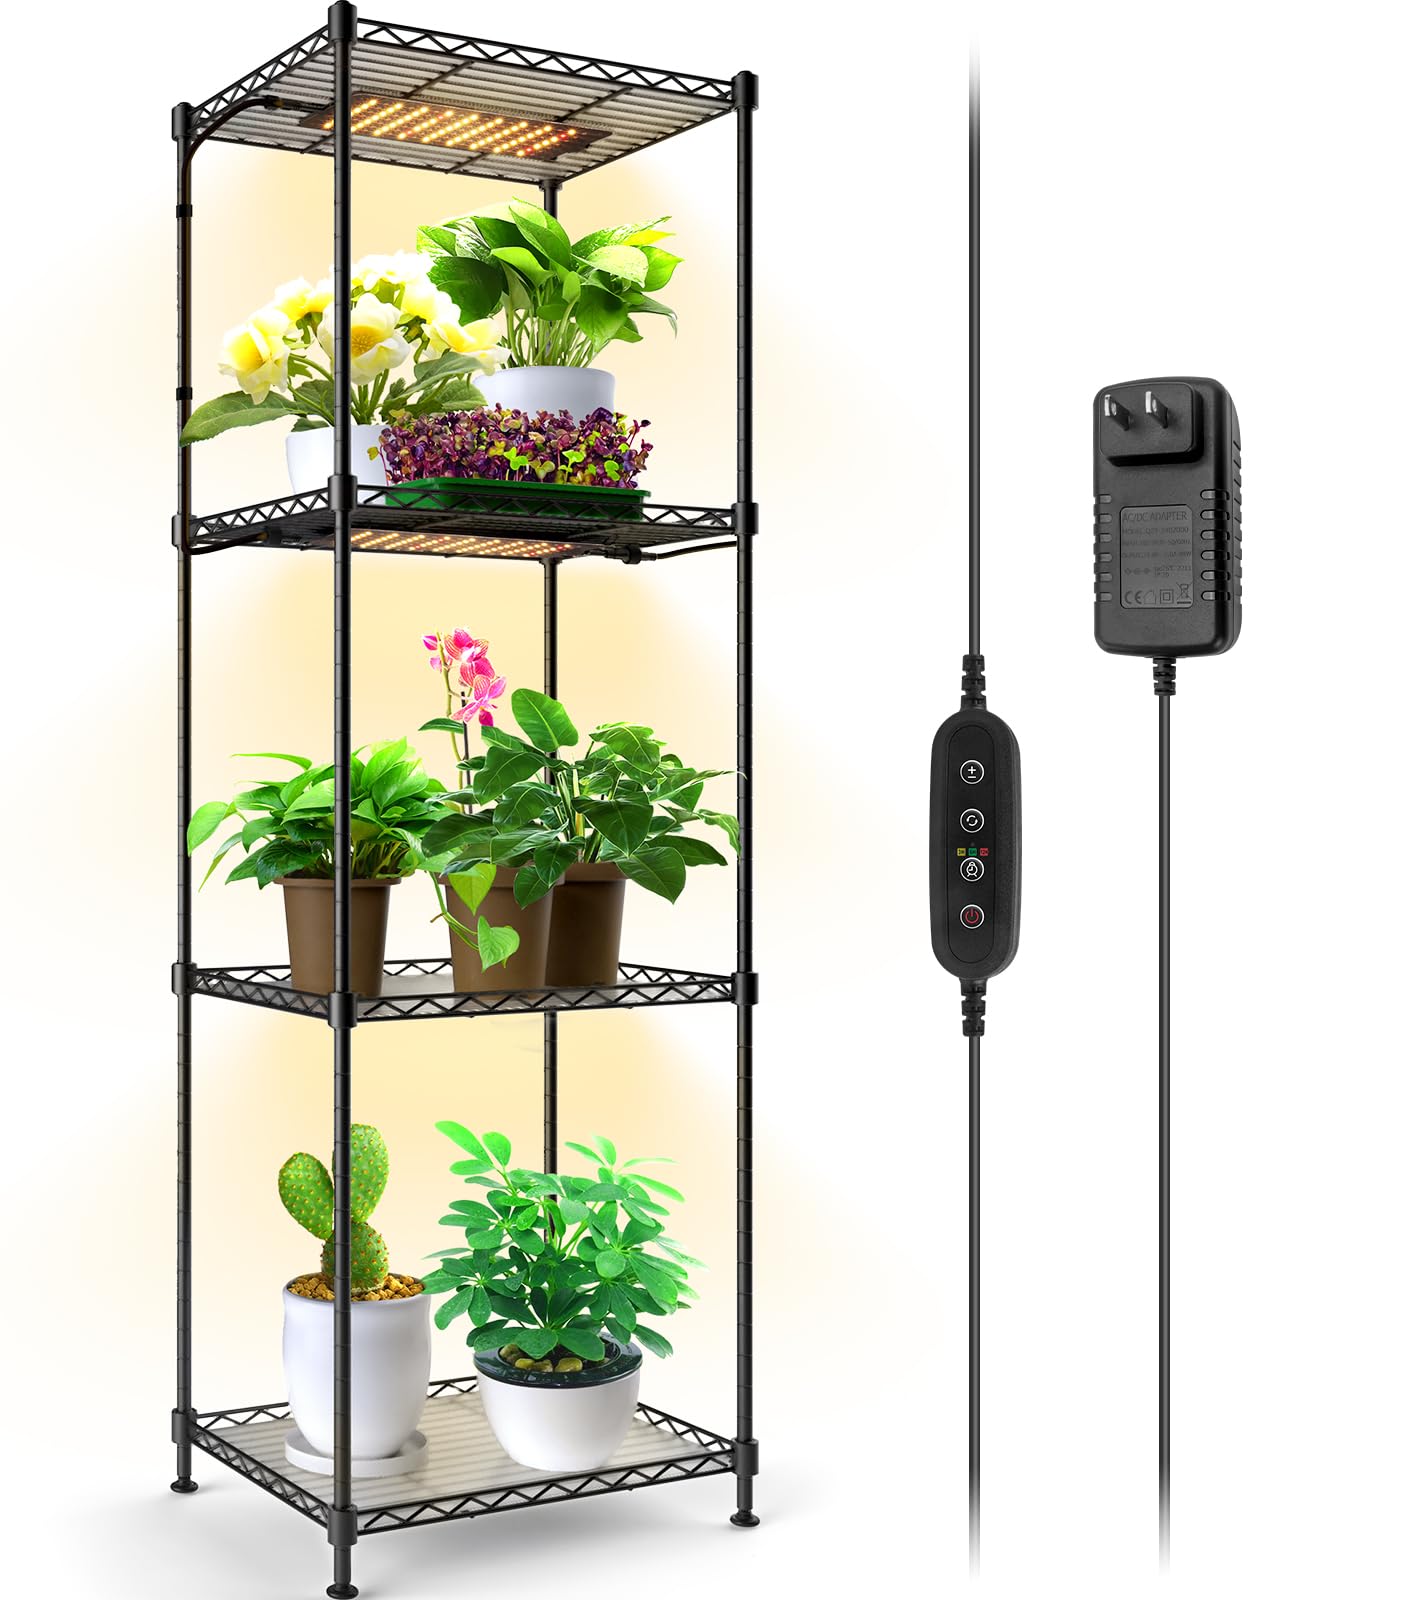 4 - Tier Plant Stand with LED Grow Lights,15.7" L x 11.8" W x 47.2" H,10W,Full Spectrum,3 lights,CJ10DCL - Barrina led